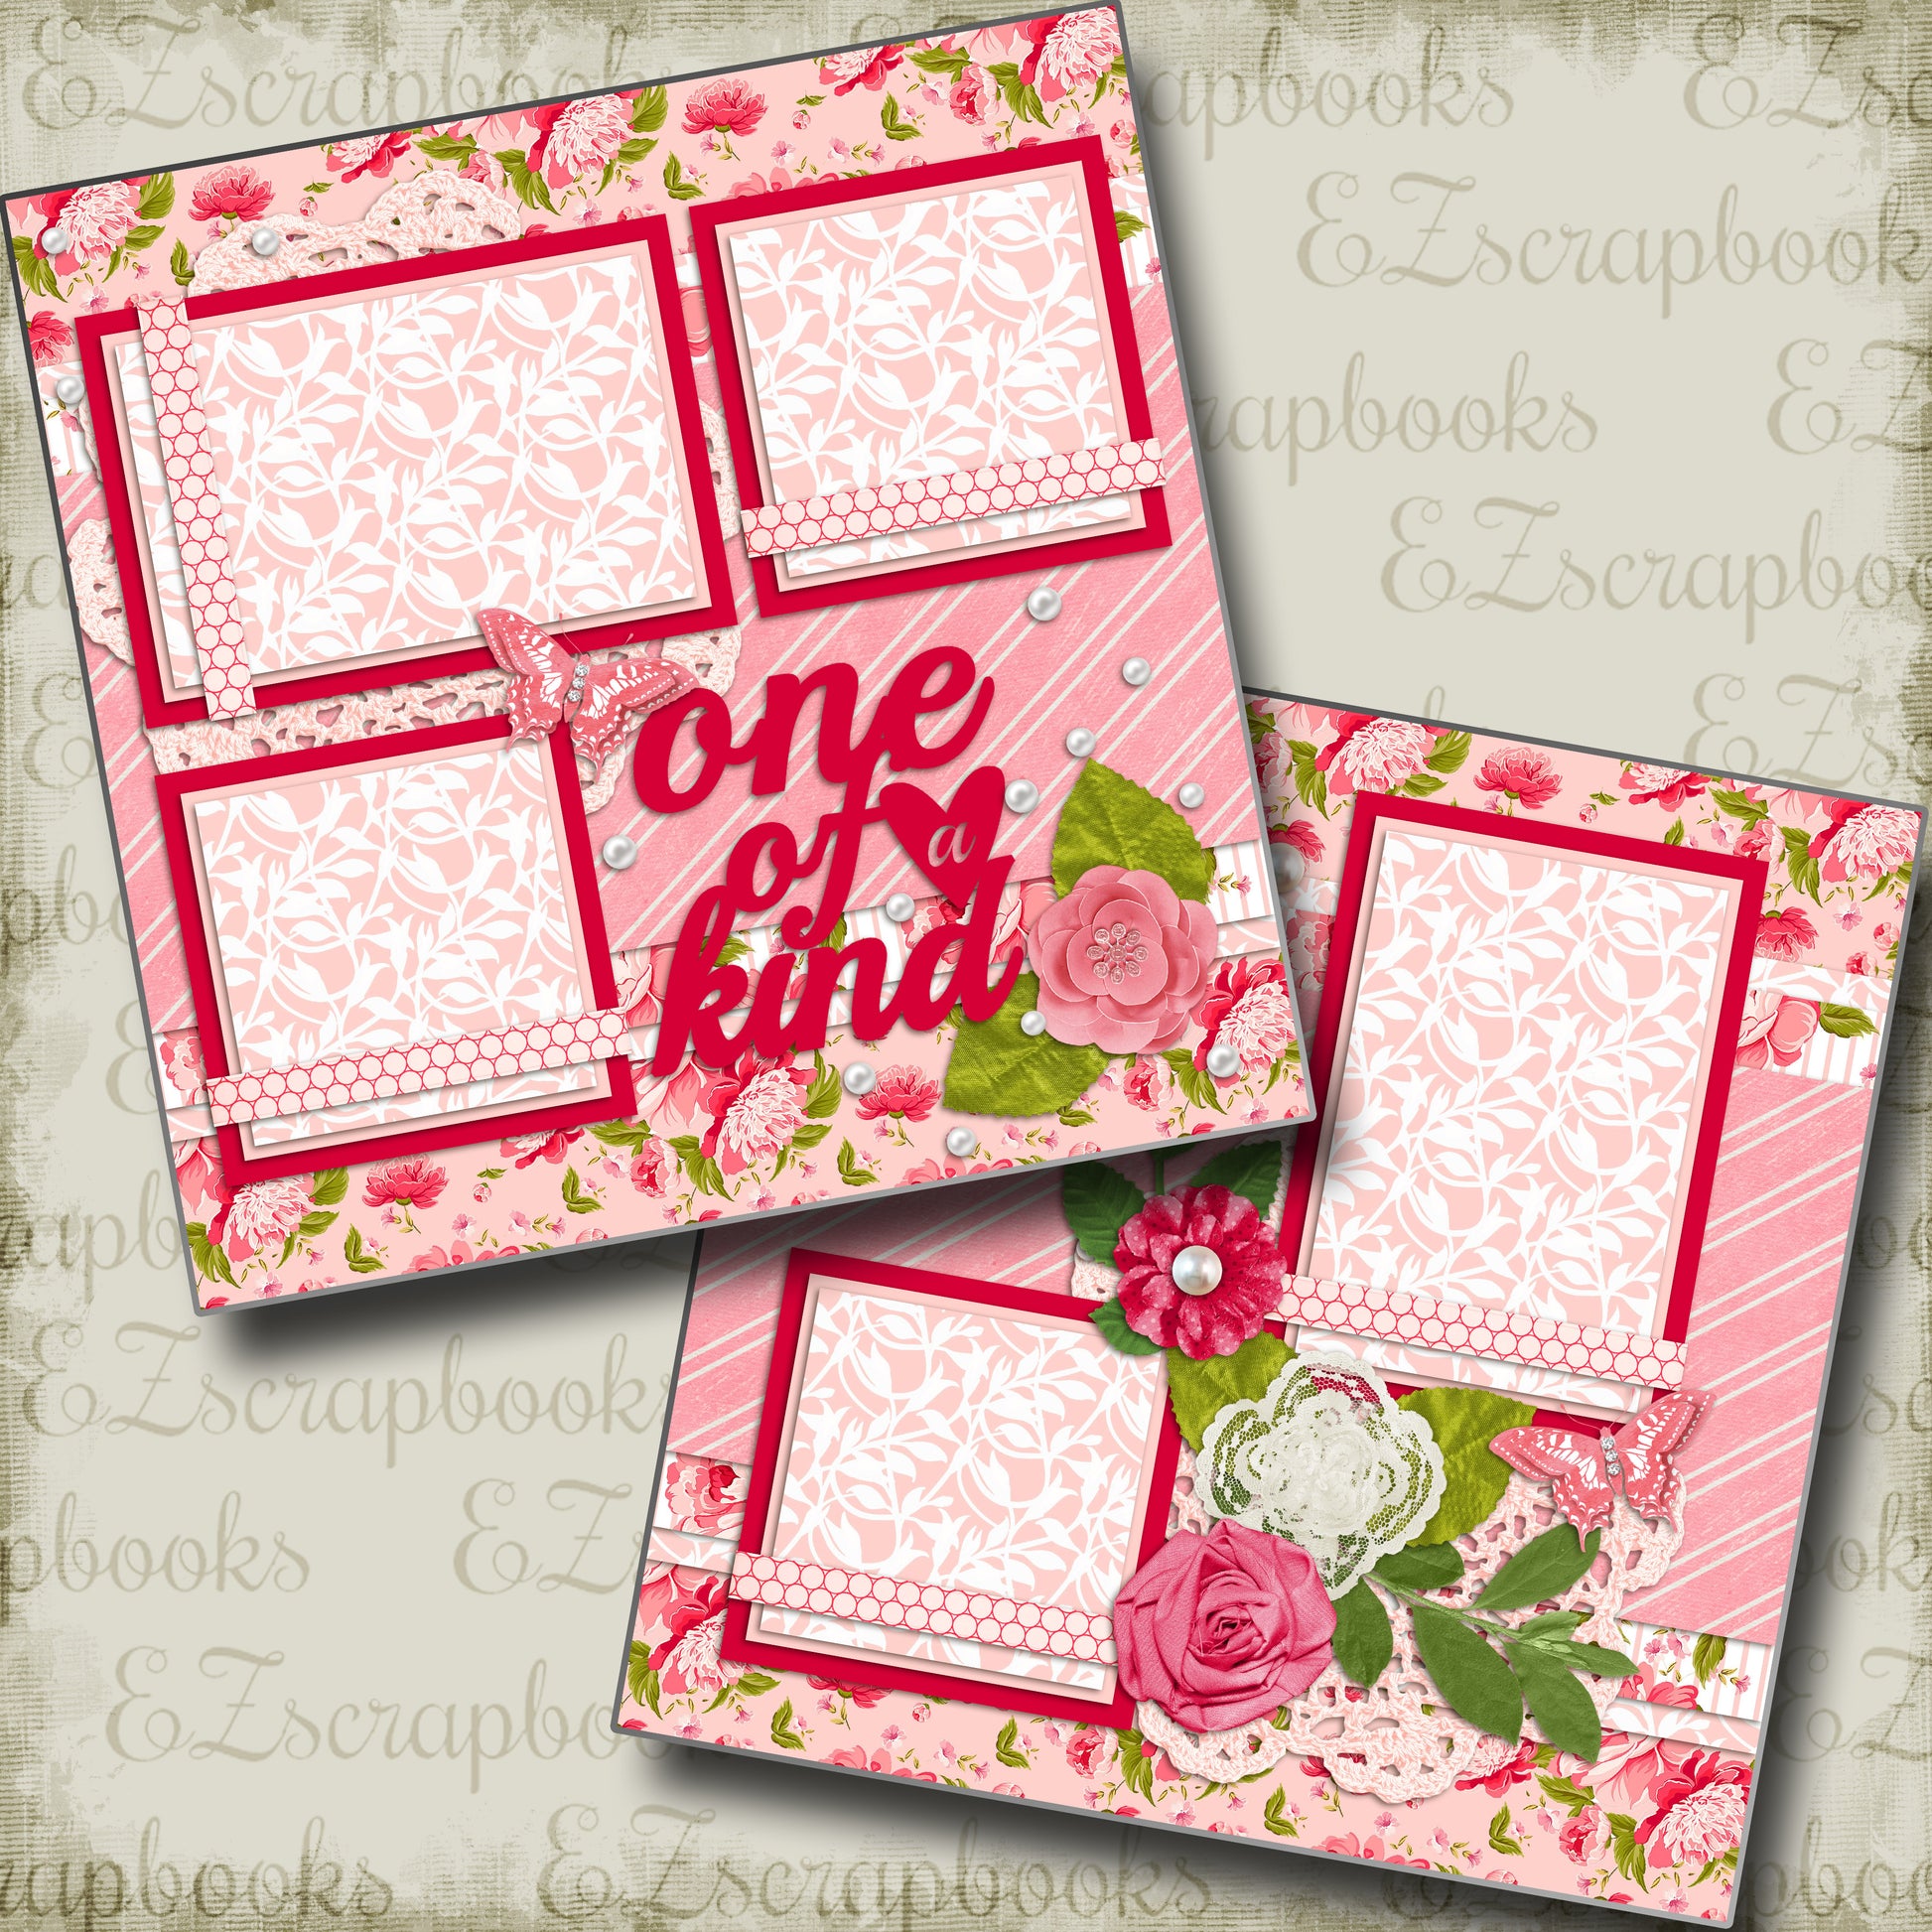 One of a Kind - 2205 - EZscrapbooks Scrapbook Layouts Girls, Other